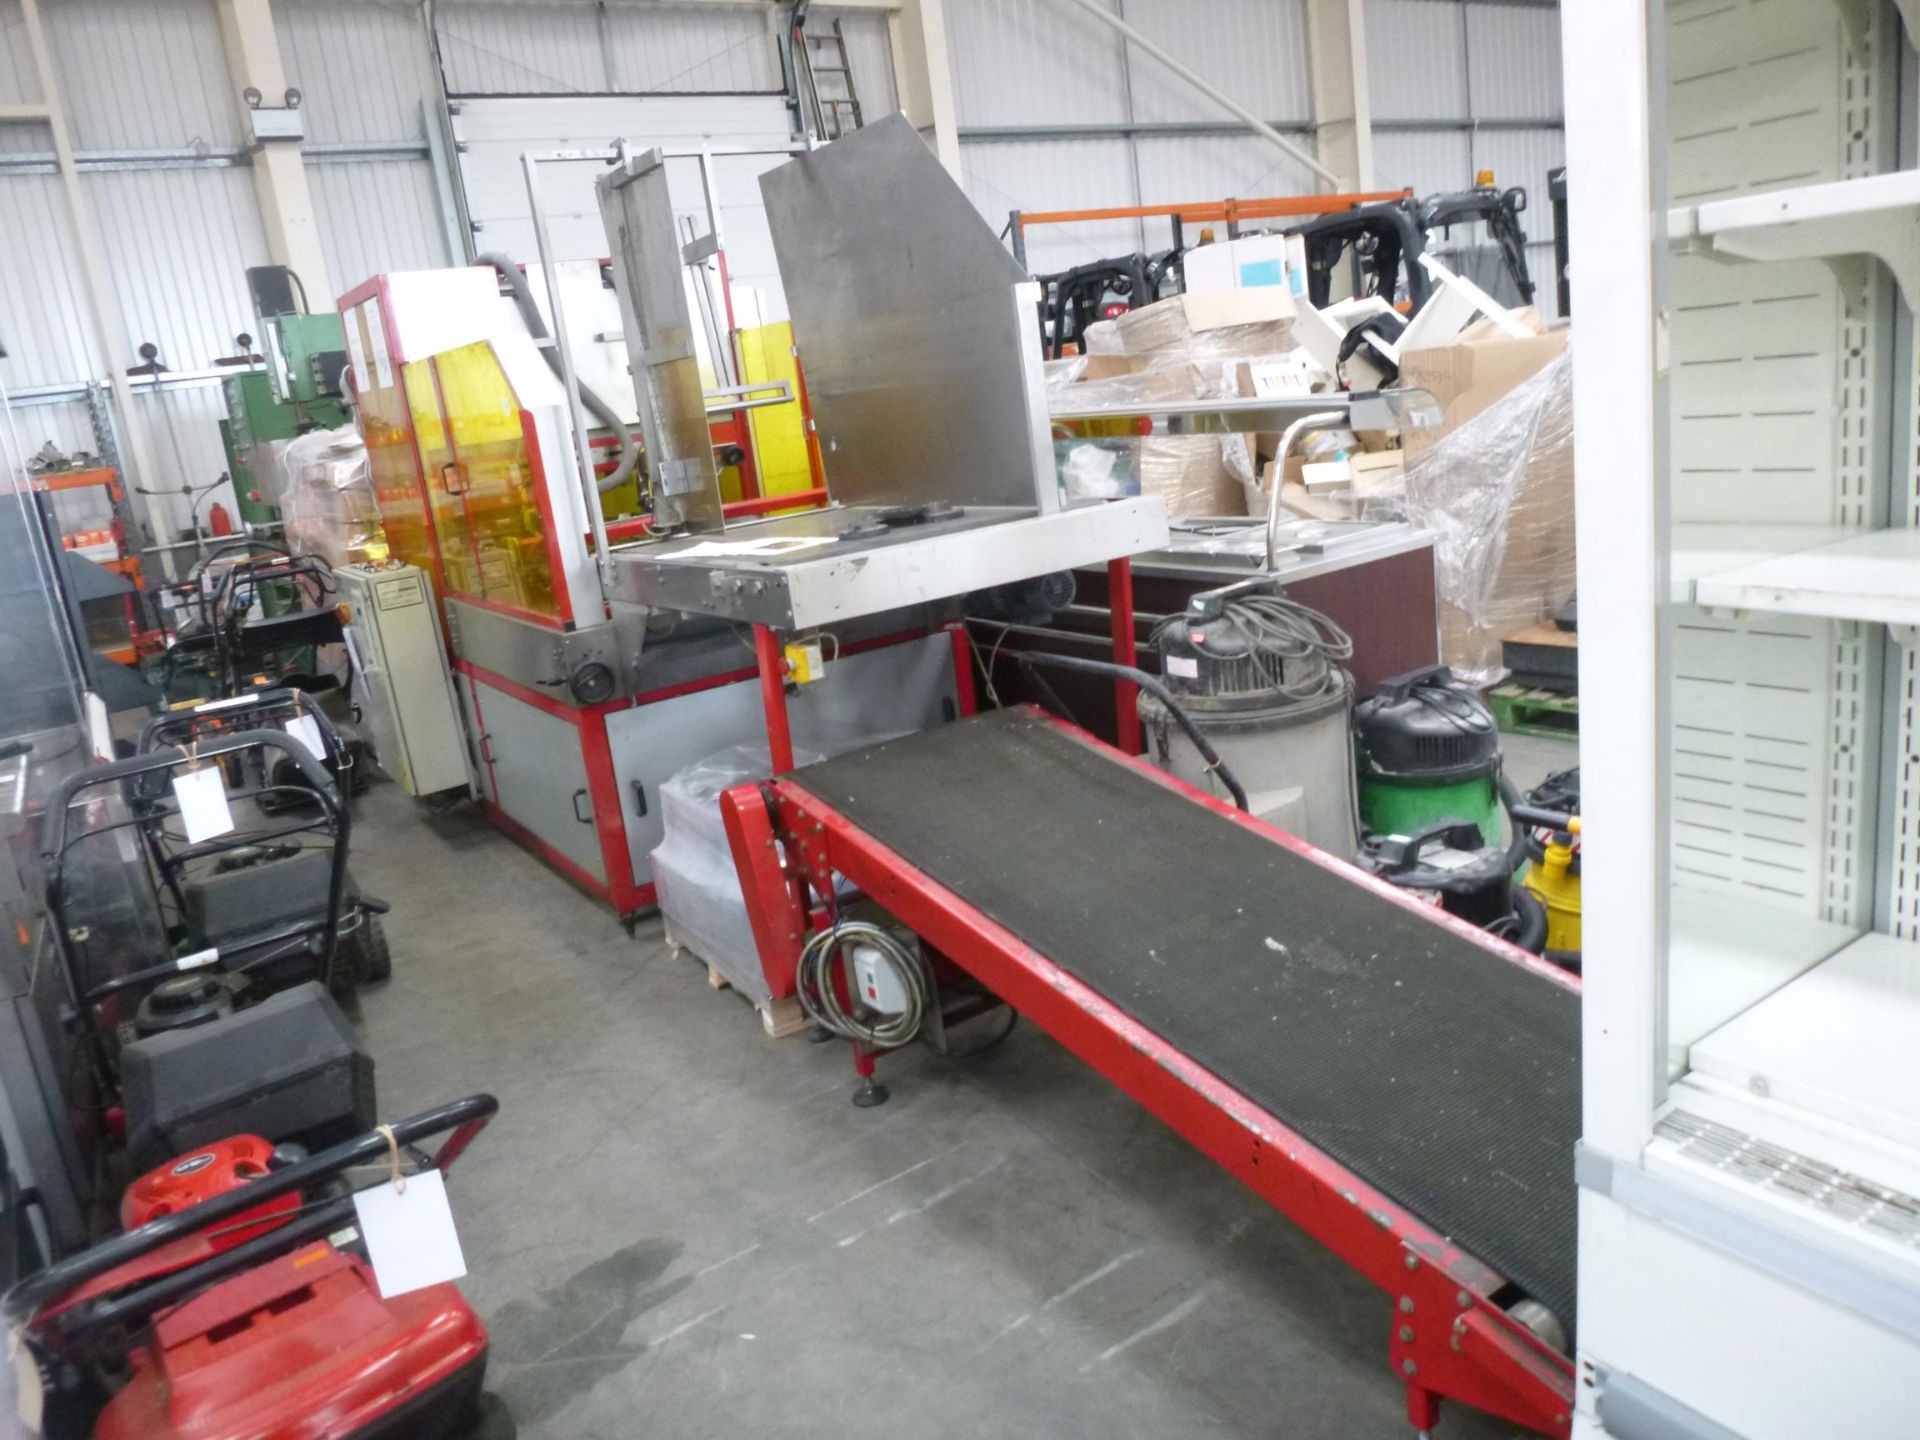 * A BMF Box Machine, 4 Point Hot Melt Gluer with conveyor belt for solid board fish boxes c/w